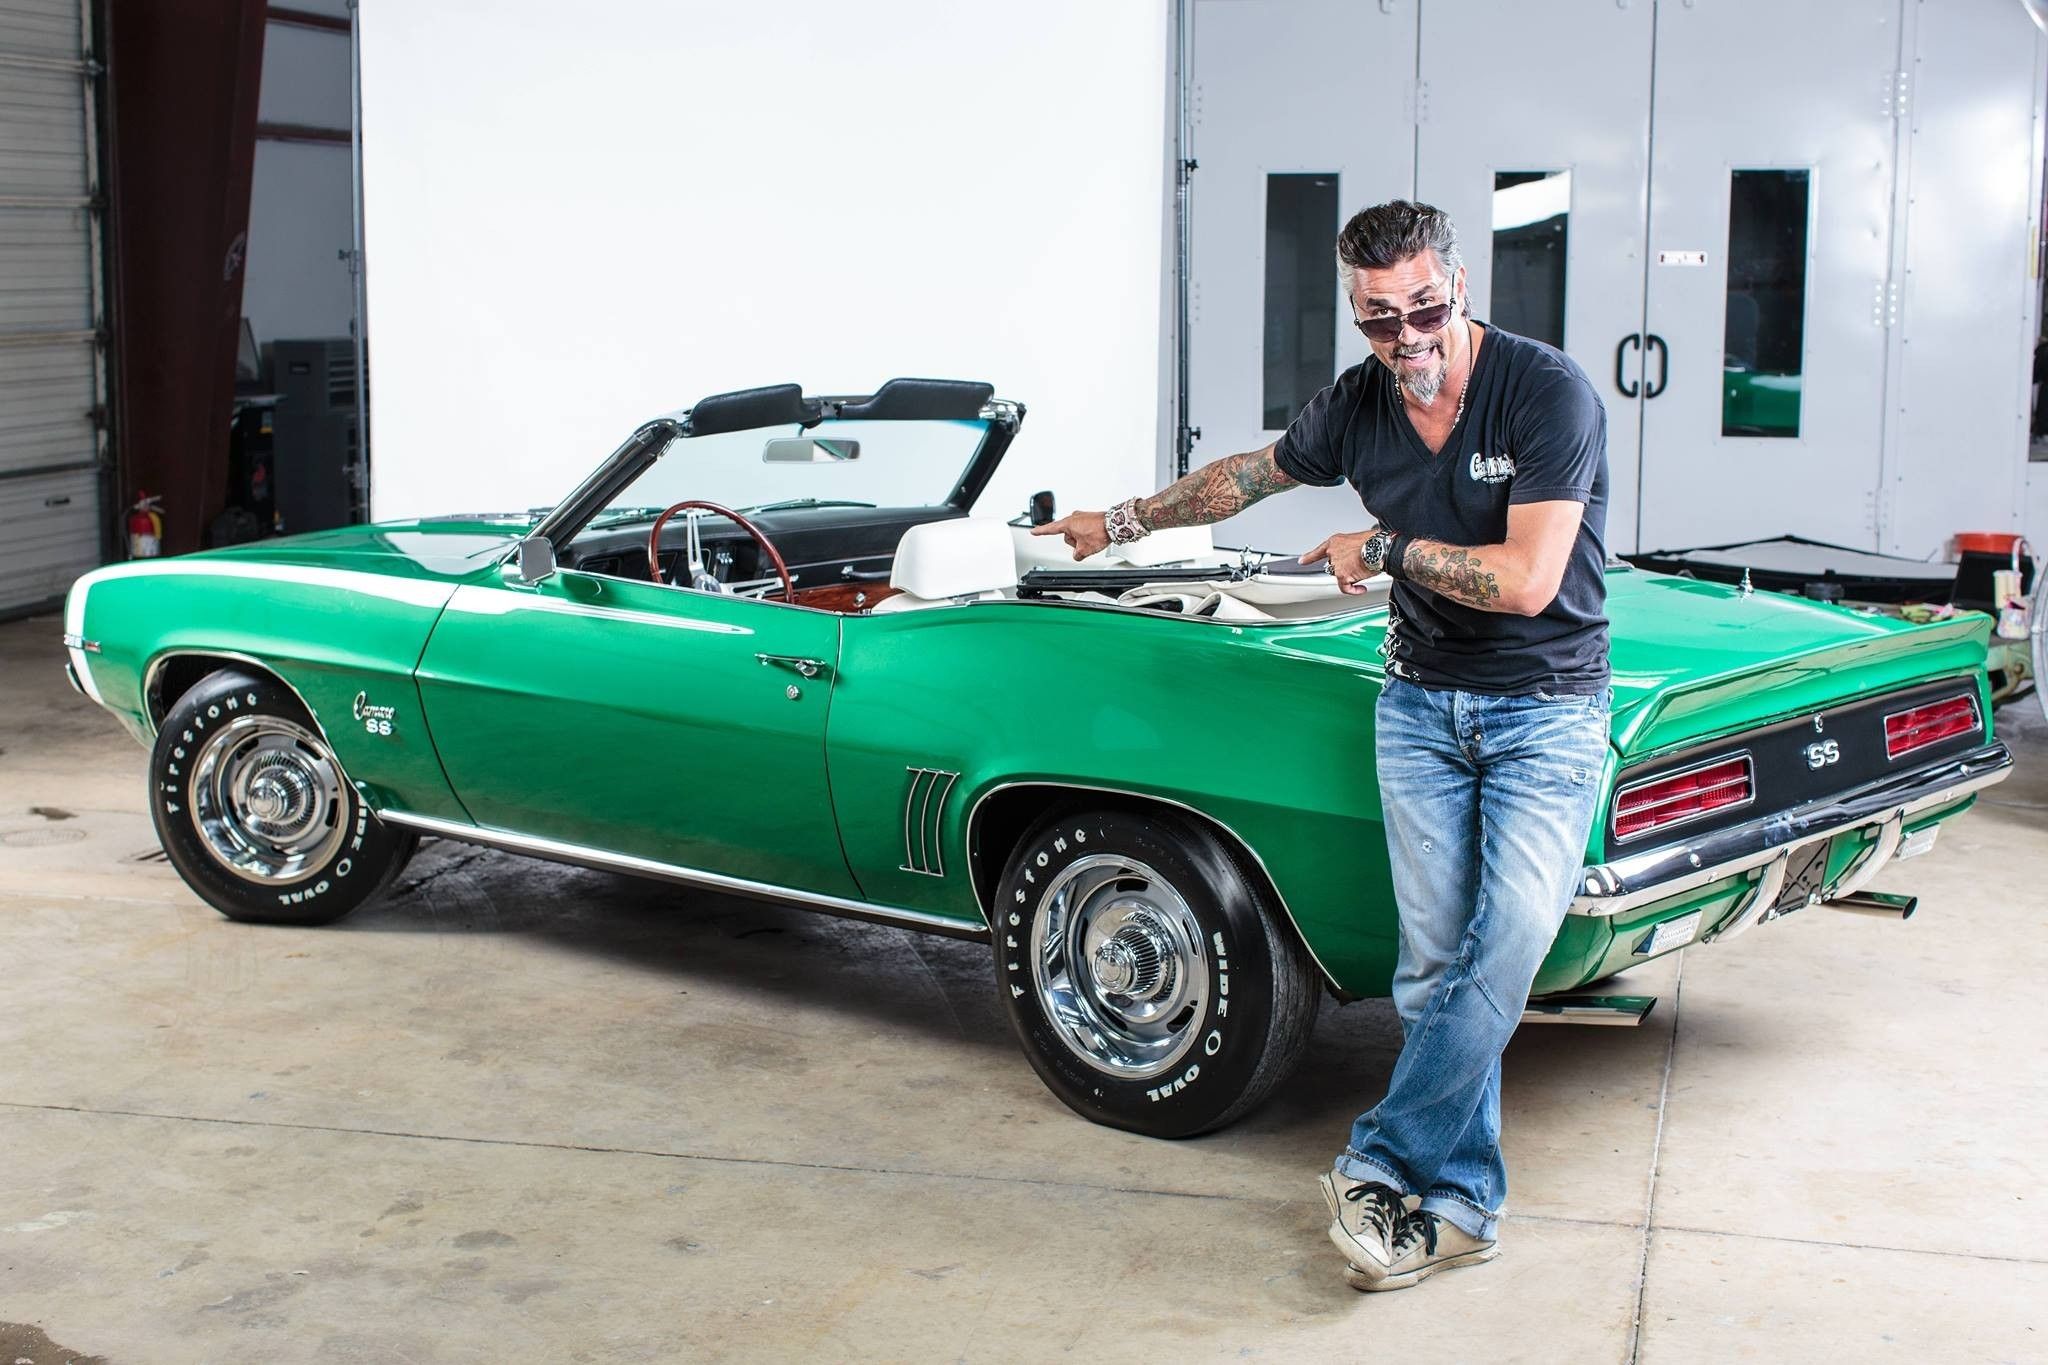 Gas Monkey Garage living from car to car